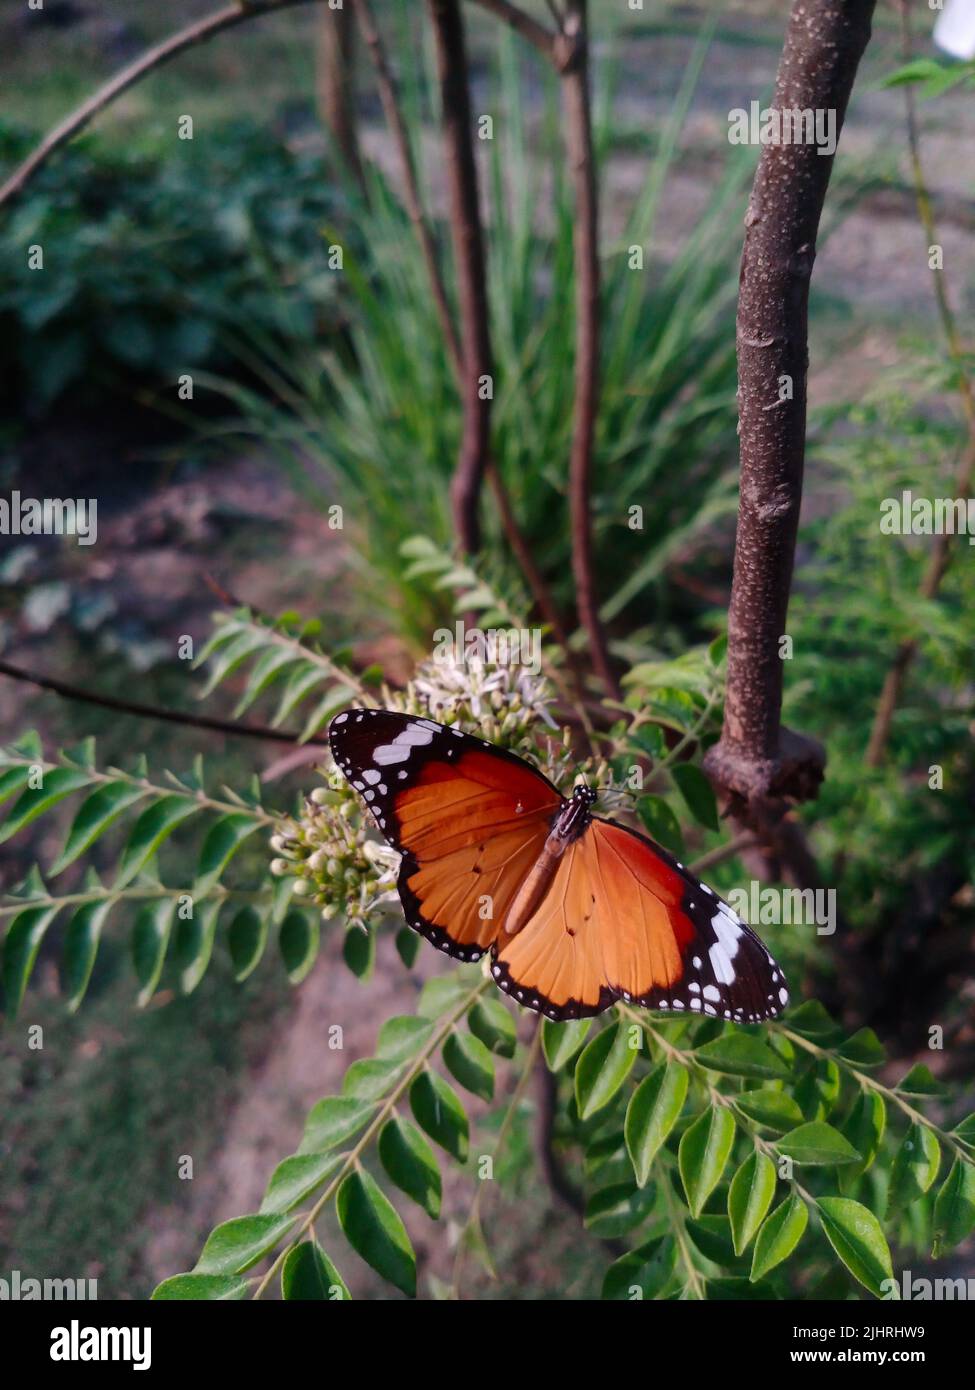 A closeup of Plain Tiger butterfly on a tree branch Stock Photo